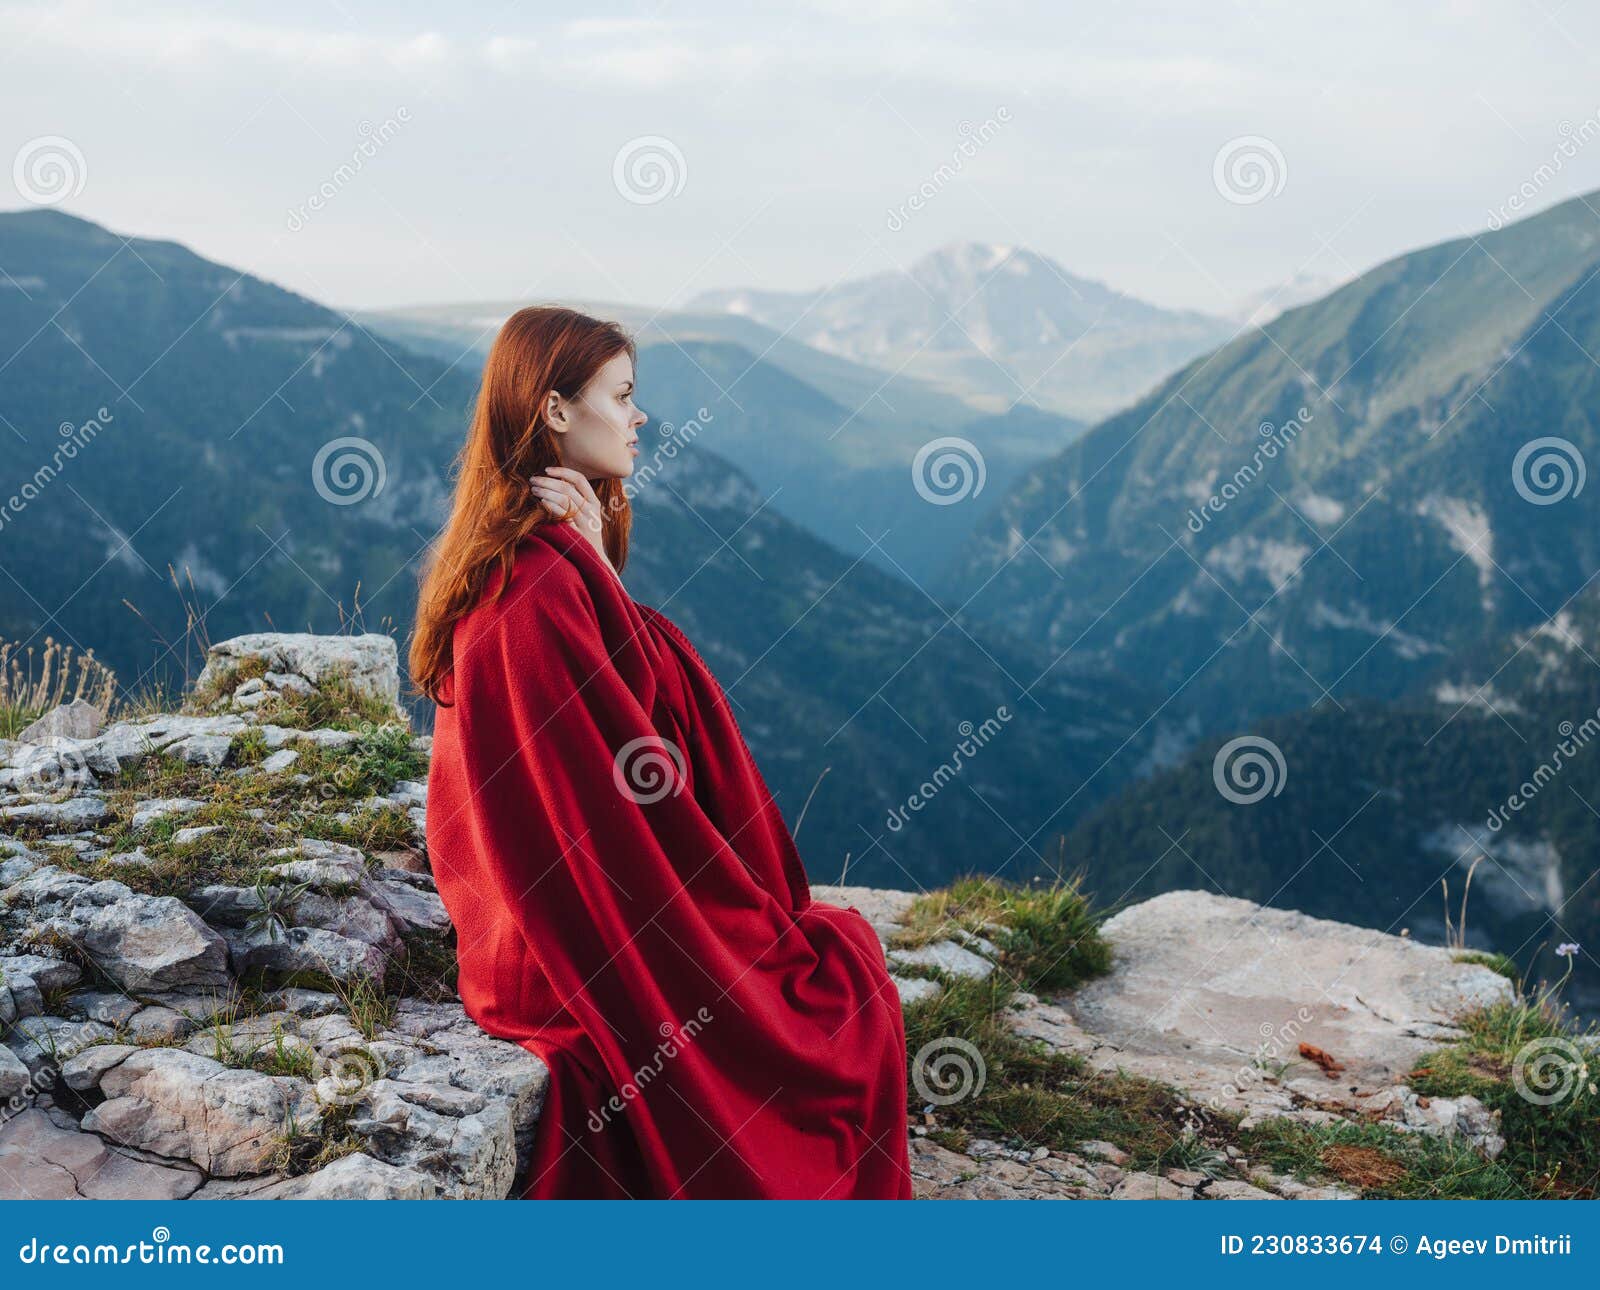 woman with red plaid cool air mountains nature